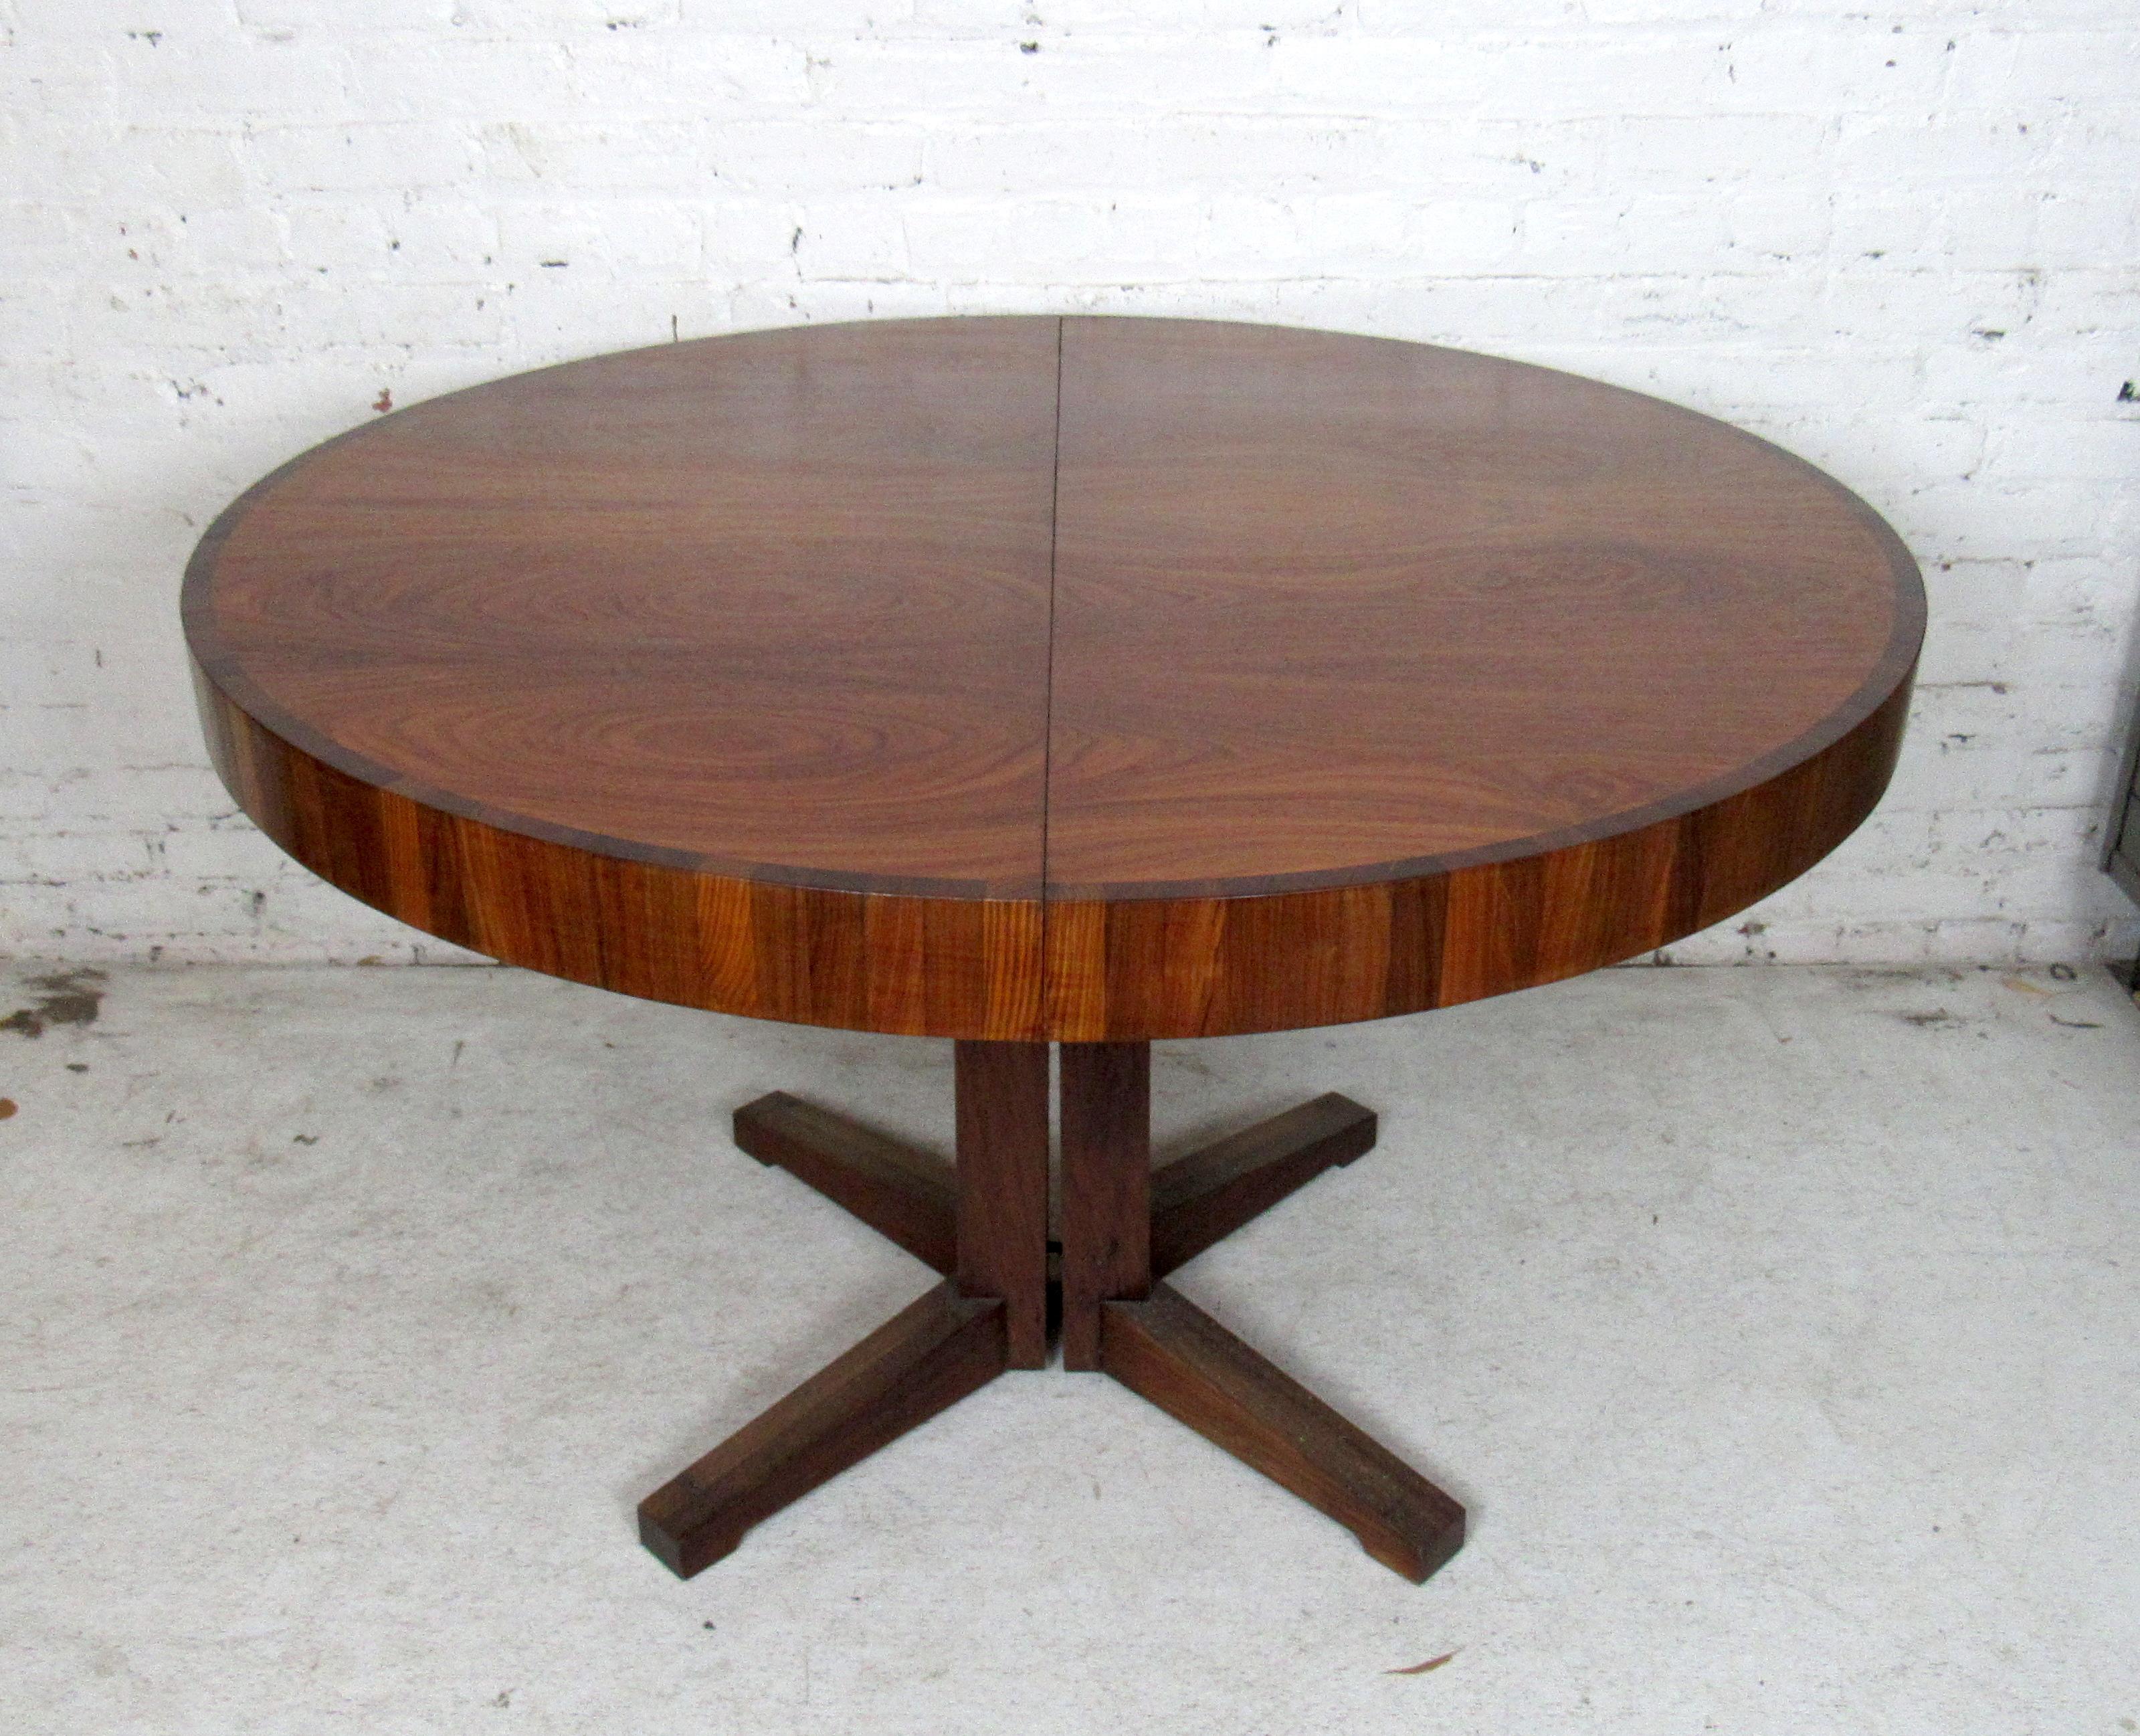 Vintage modern round dining table featured in rich rosewood grain. This dining table comes with a leaf that extends the length of the table into an oval shape.
Extends to 63